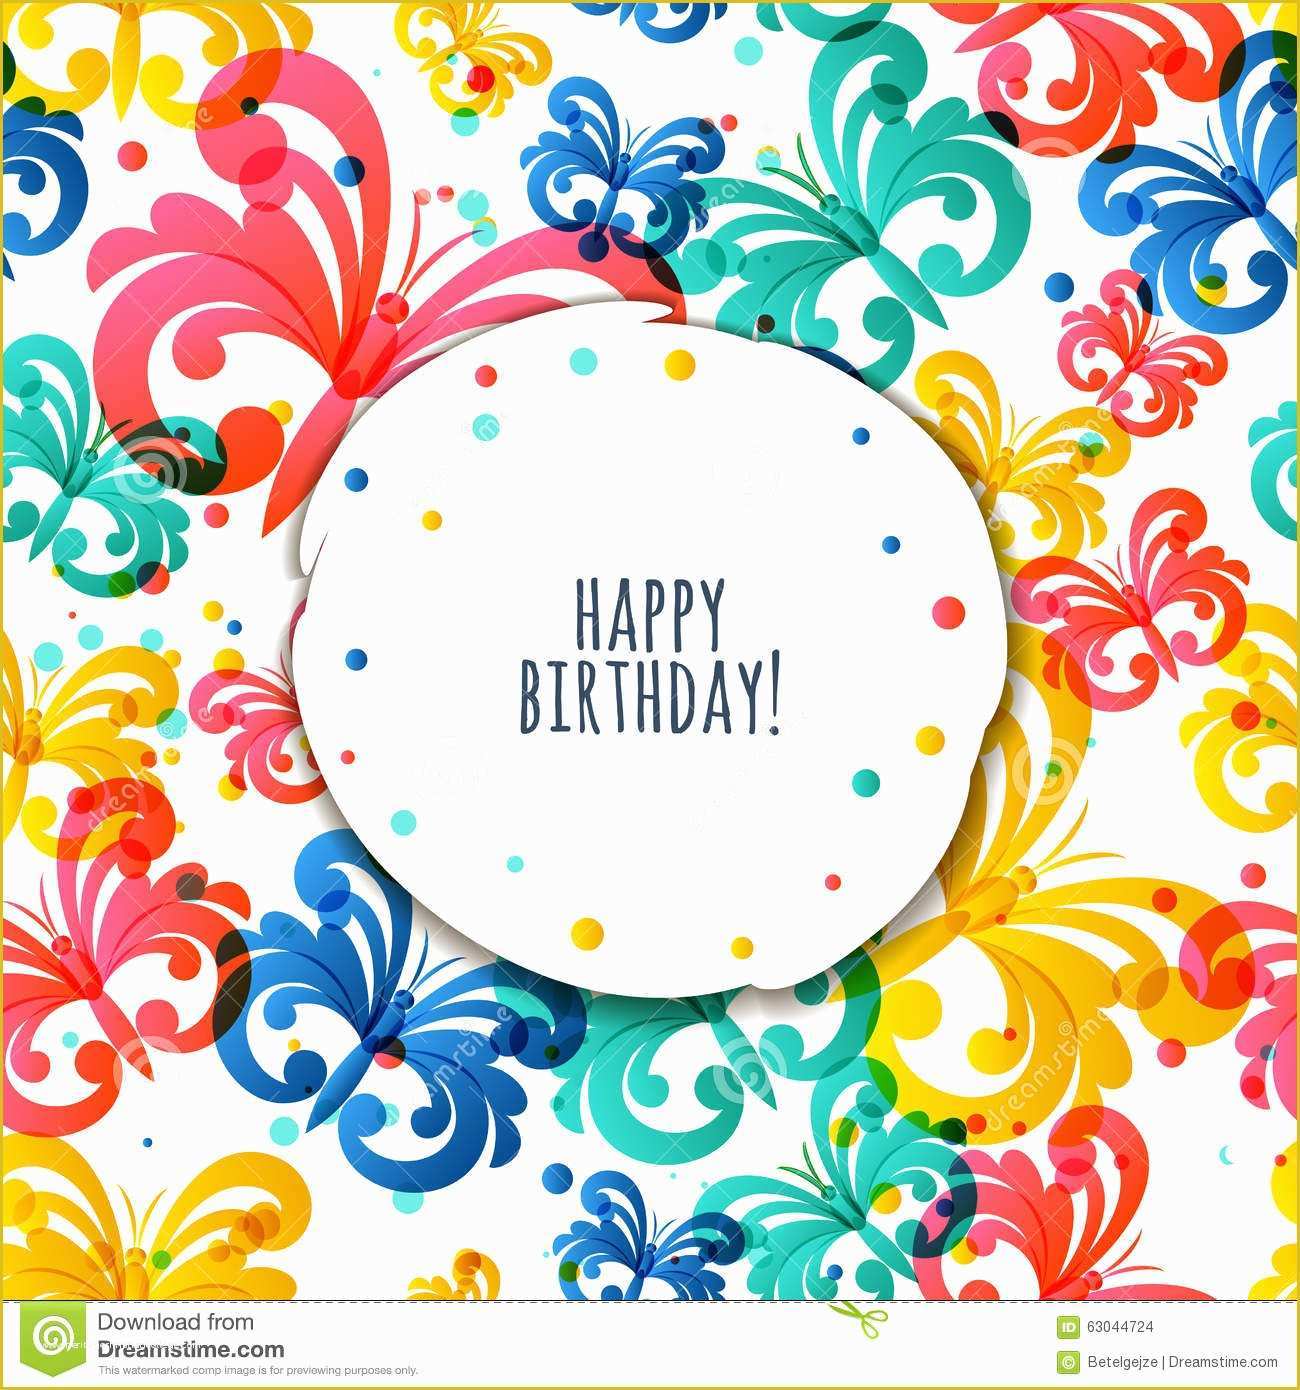 Free Photo Birthday Card Template Of Vector Greeting Birthday Card Template with Flying